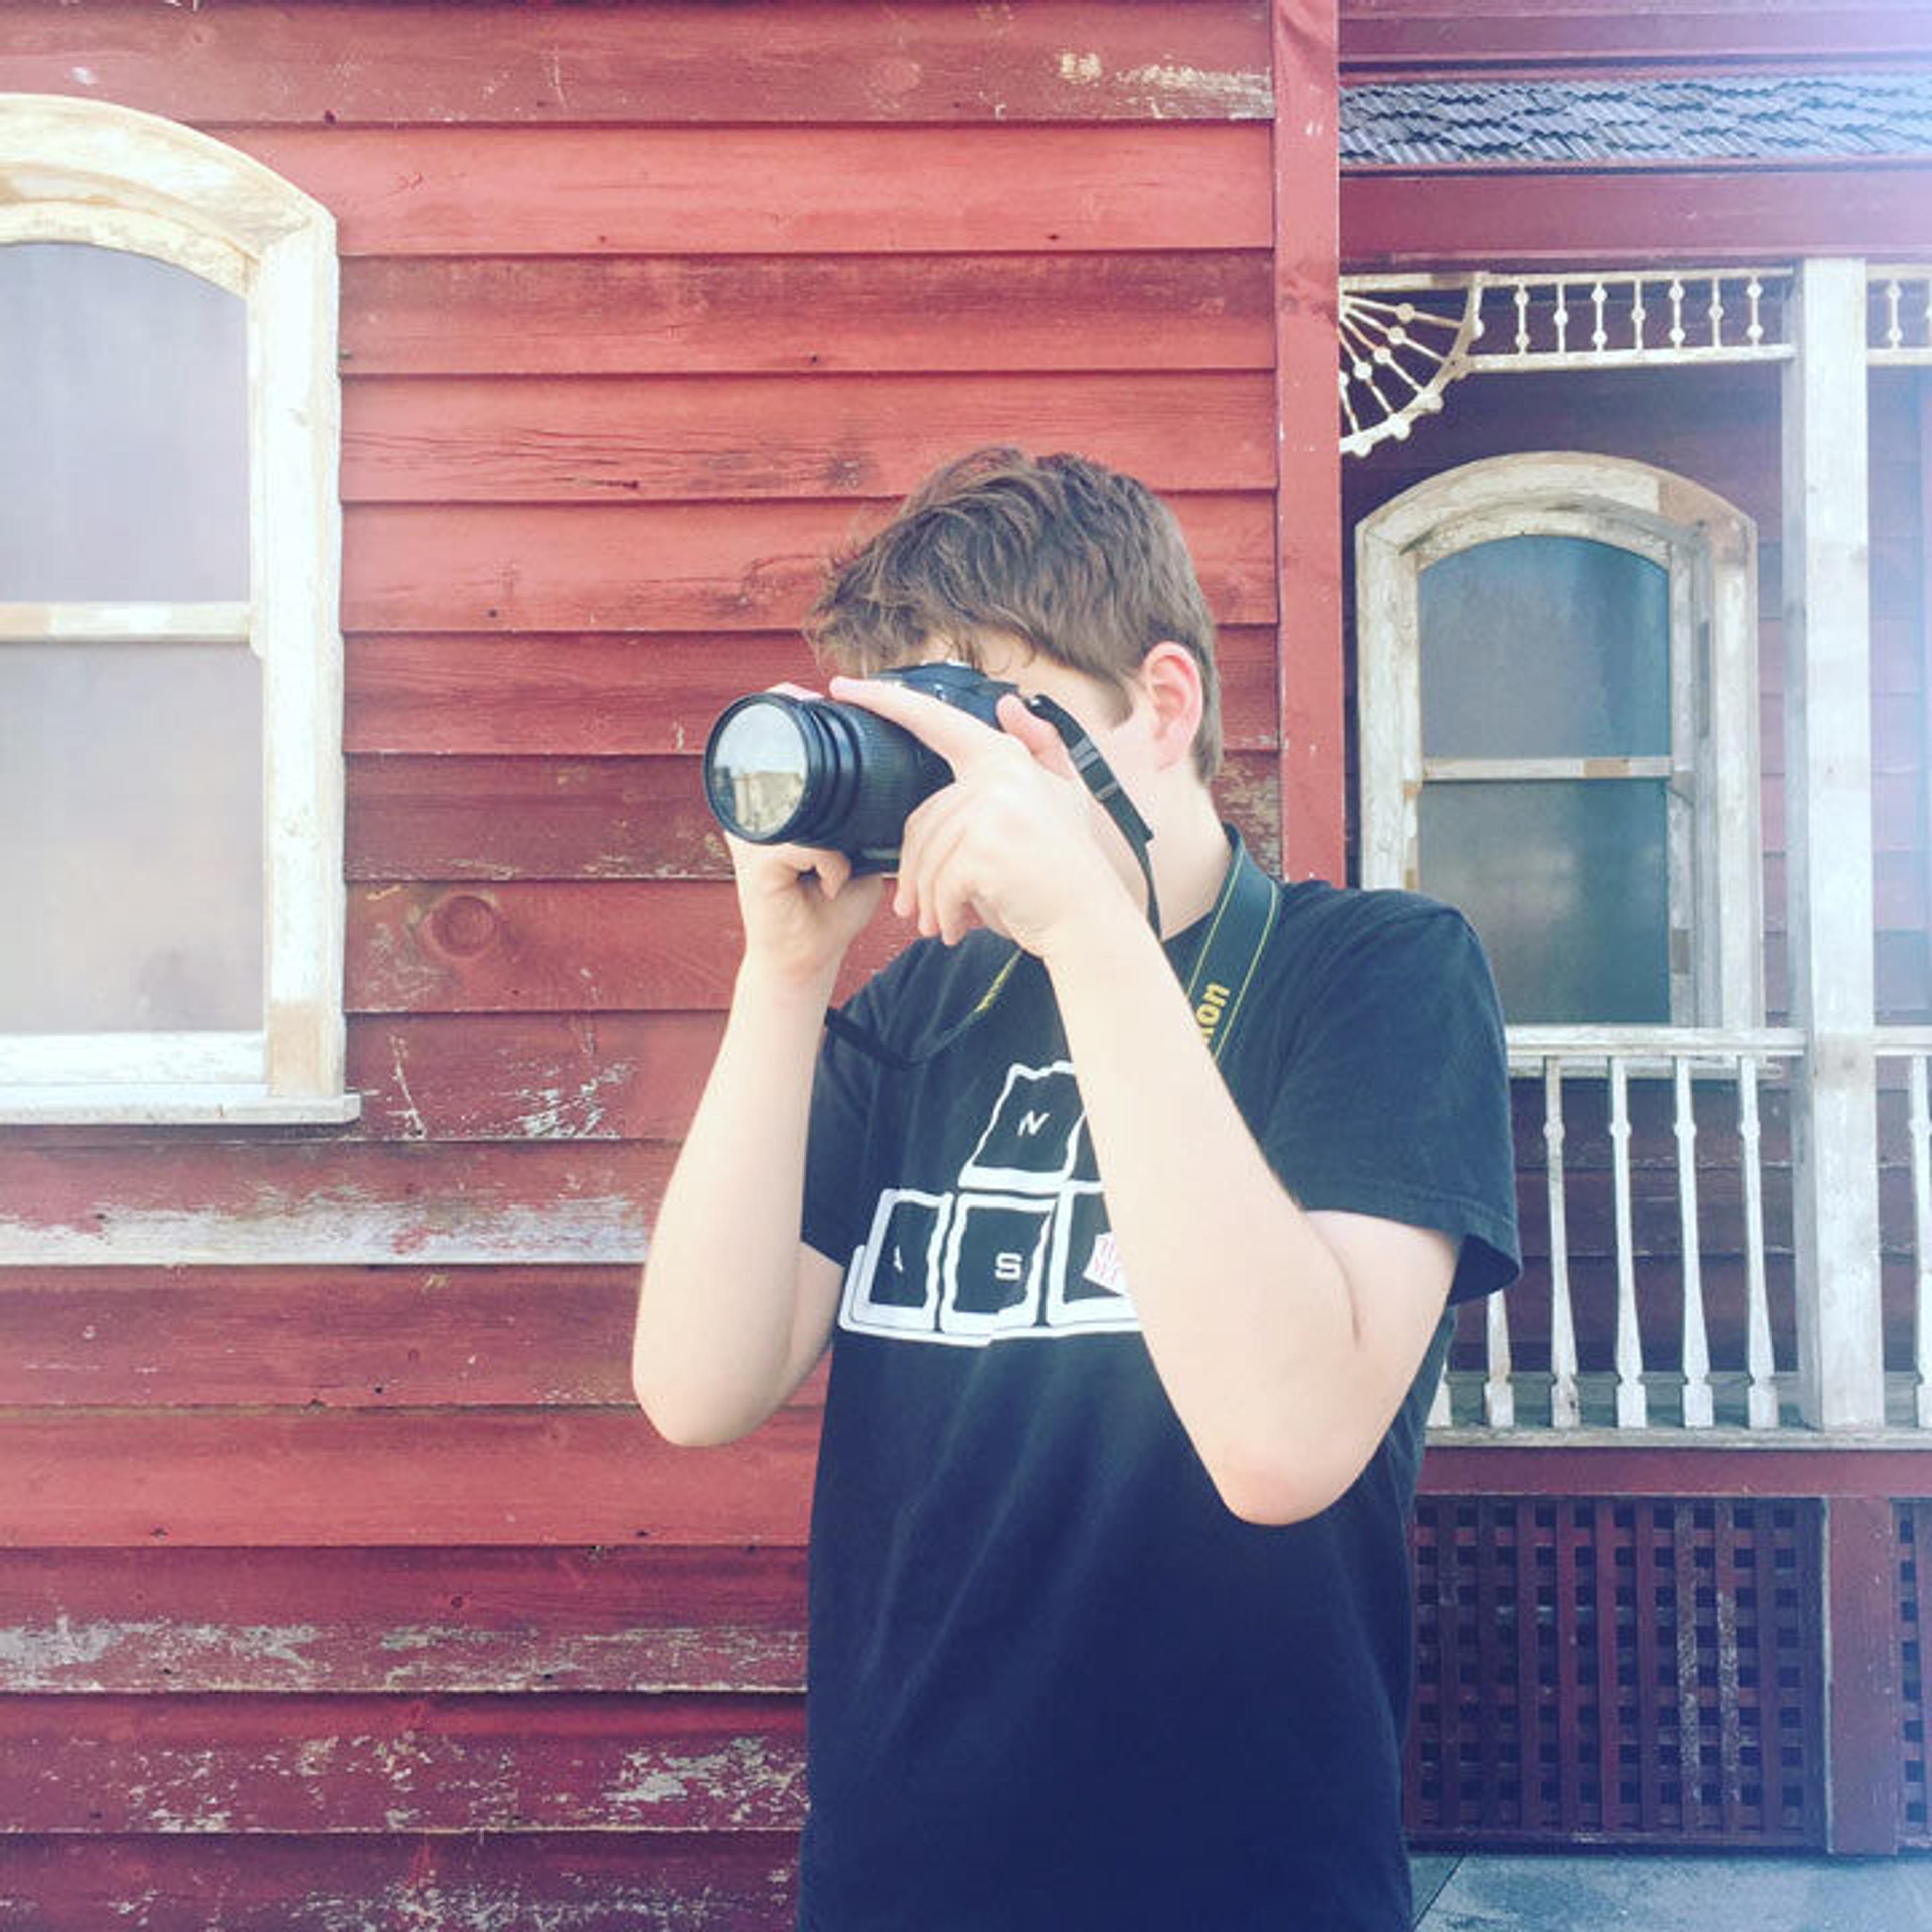 A teen wearing a black shirt takes a photograph in front of a red barn